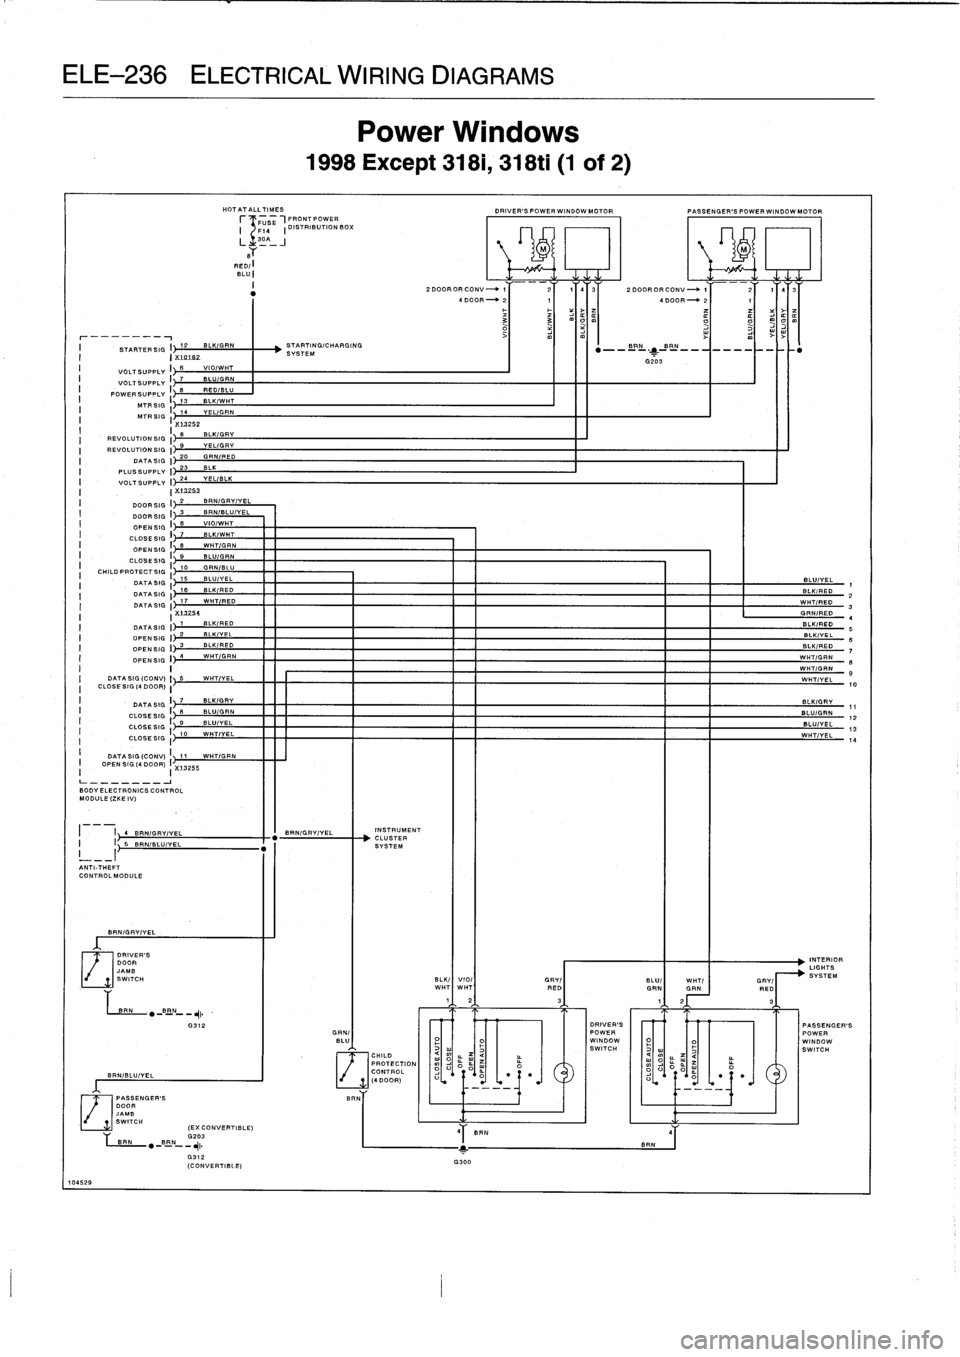 BMW M3 1994 E36 Repair Manual 
ELE-236
ELECTRICAL
WIRING
DIAGRAMS

HOTATALLTIMES
f
-
-T
USE
-1FRONTPOWER
F14

	

I
DISTRIBUTION
BOX

RED/
:
BLU
:

I

	

STARTERSIG
I
12

	

BLKIGRN

	

STARTING/CHARGING
I

	

I
X
10182

	

SYSTEM
